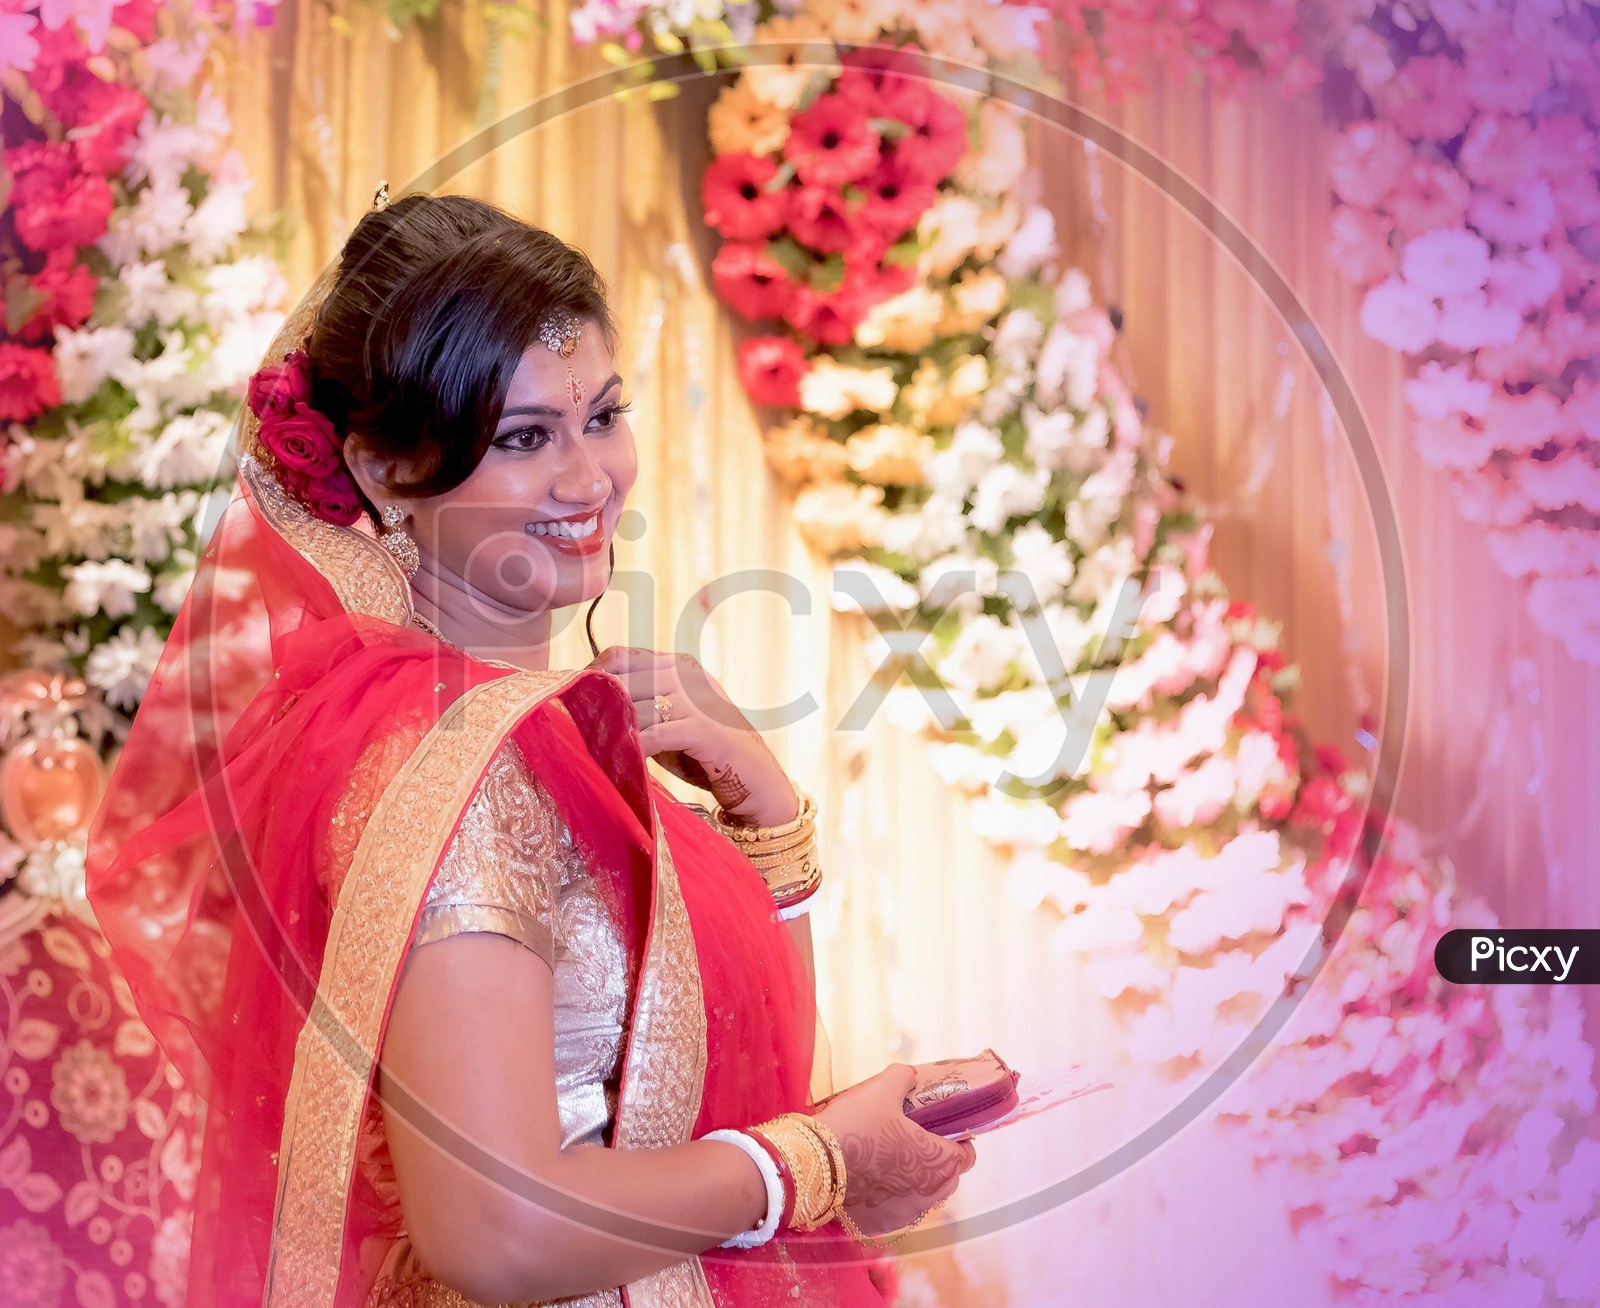 Stunning Indian Bride Dressed In Hindu Red Traditional Wedding Clothes Sari Embroidered With Gold Jewelry And A Veil Smiles Tender With Extra Copy Space.